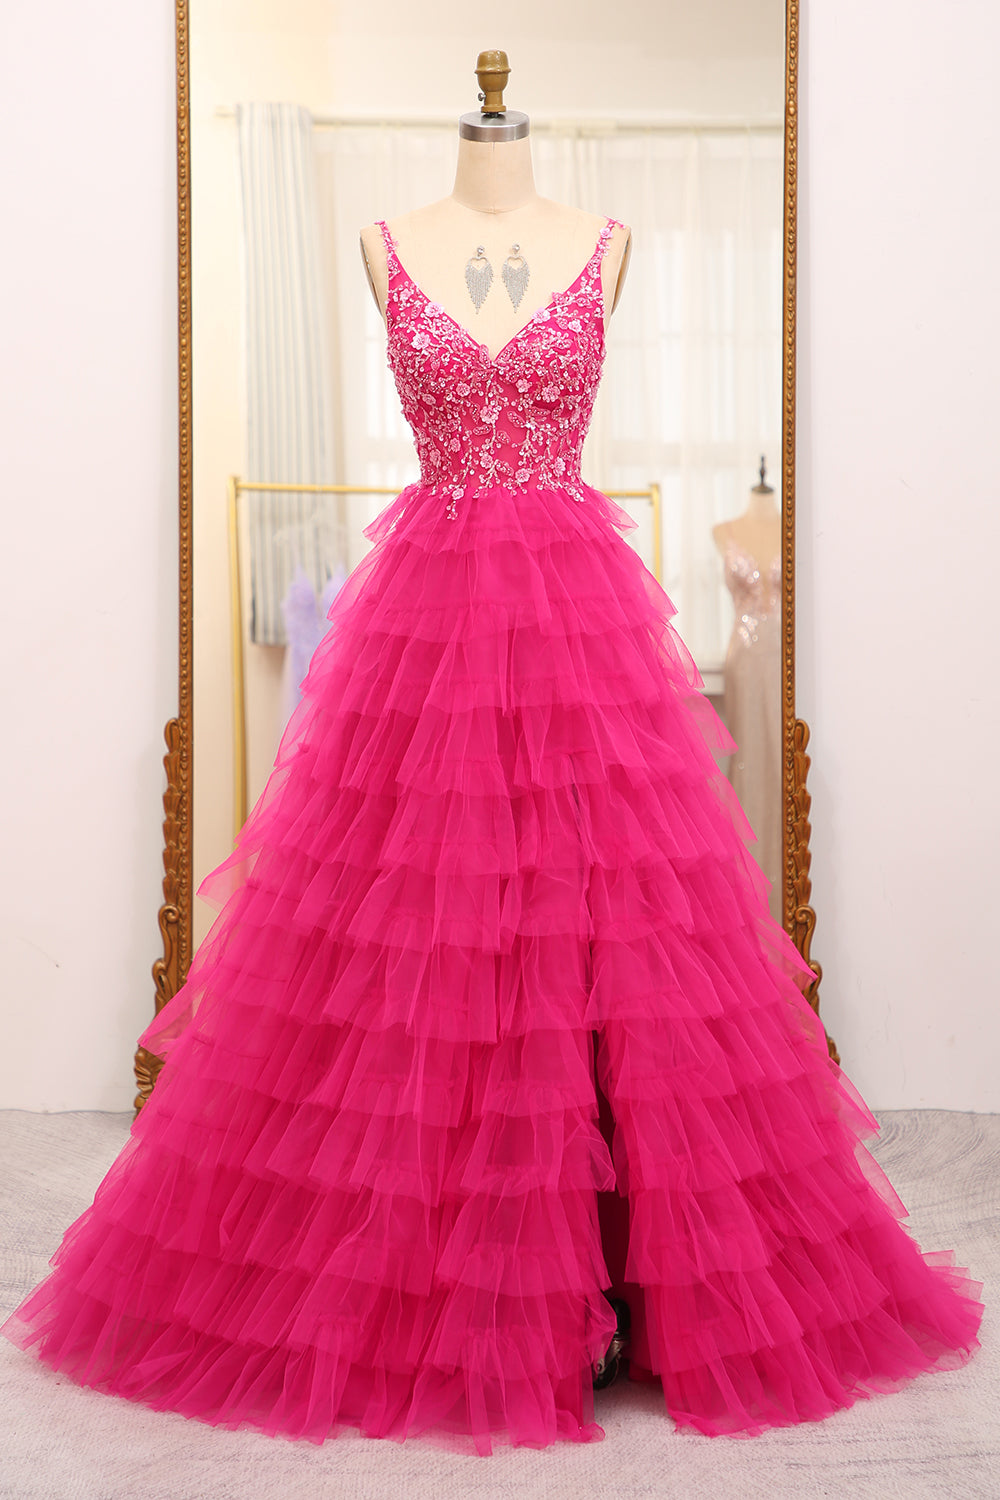 Fuchsia Spaghetti Straps A-Line Tulle Beaded Prom Dress With Slit